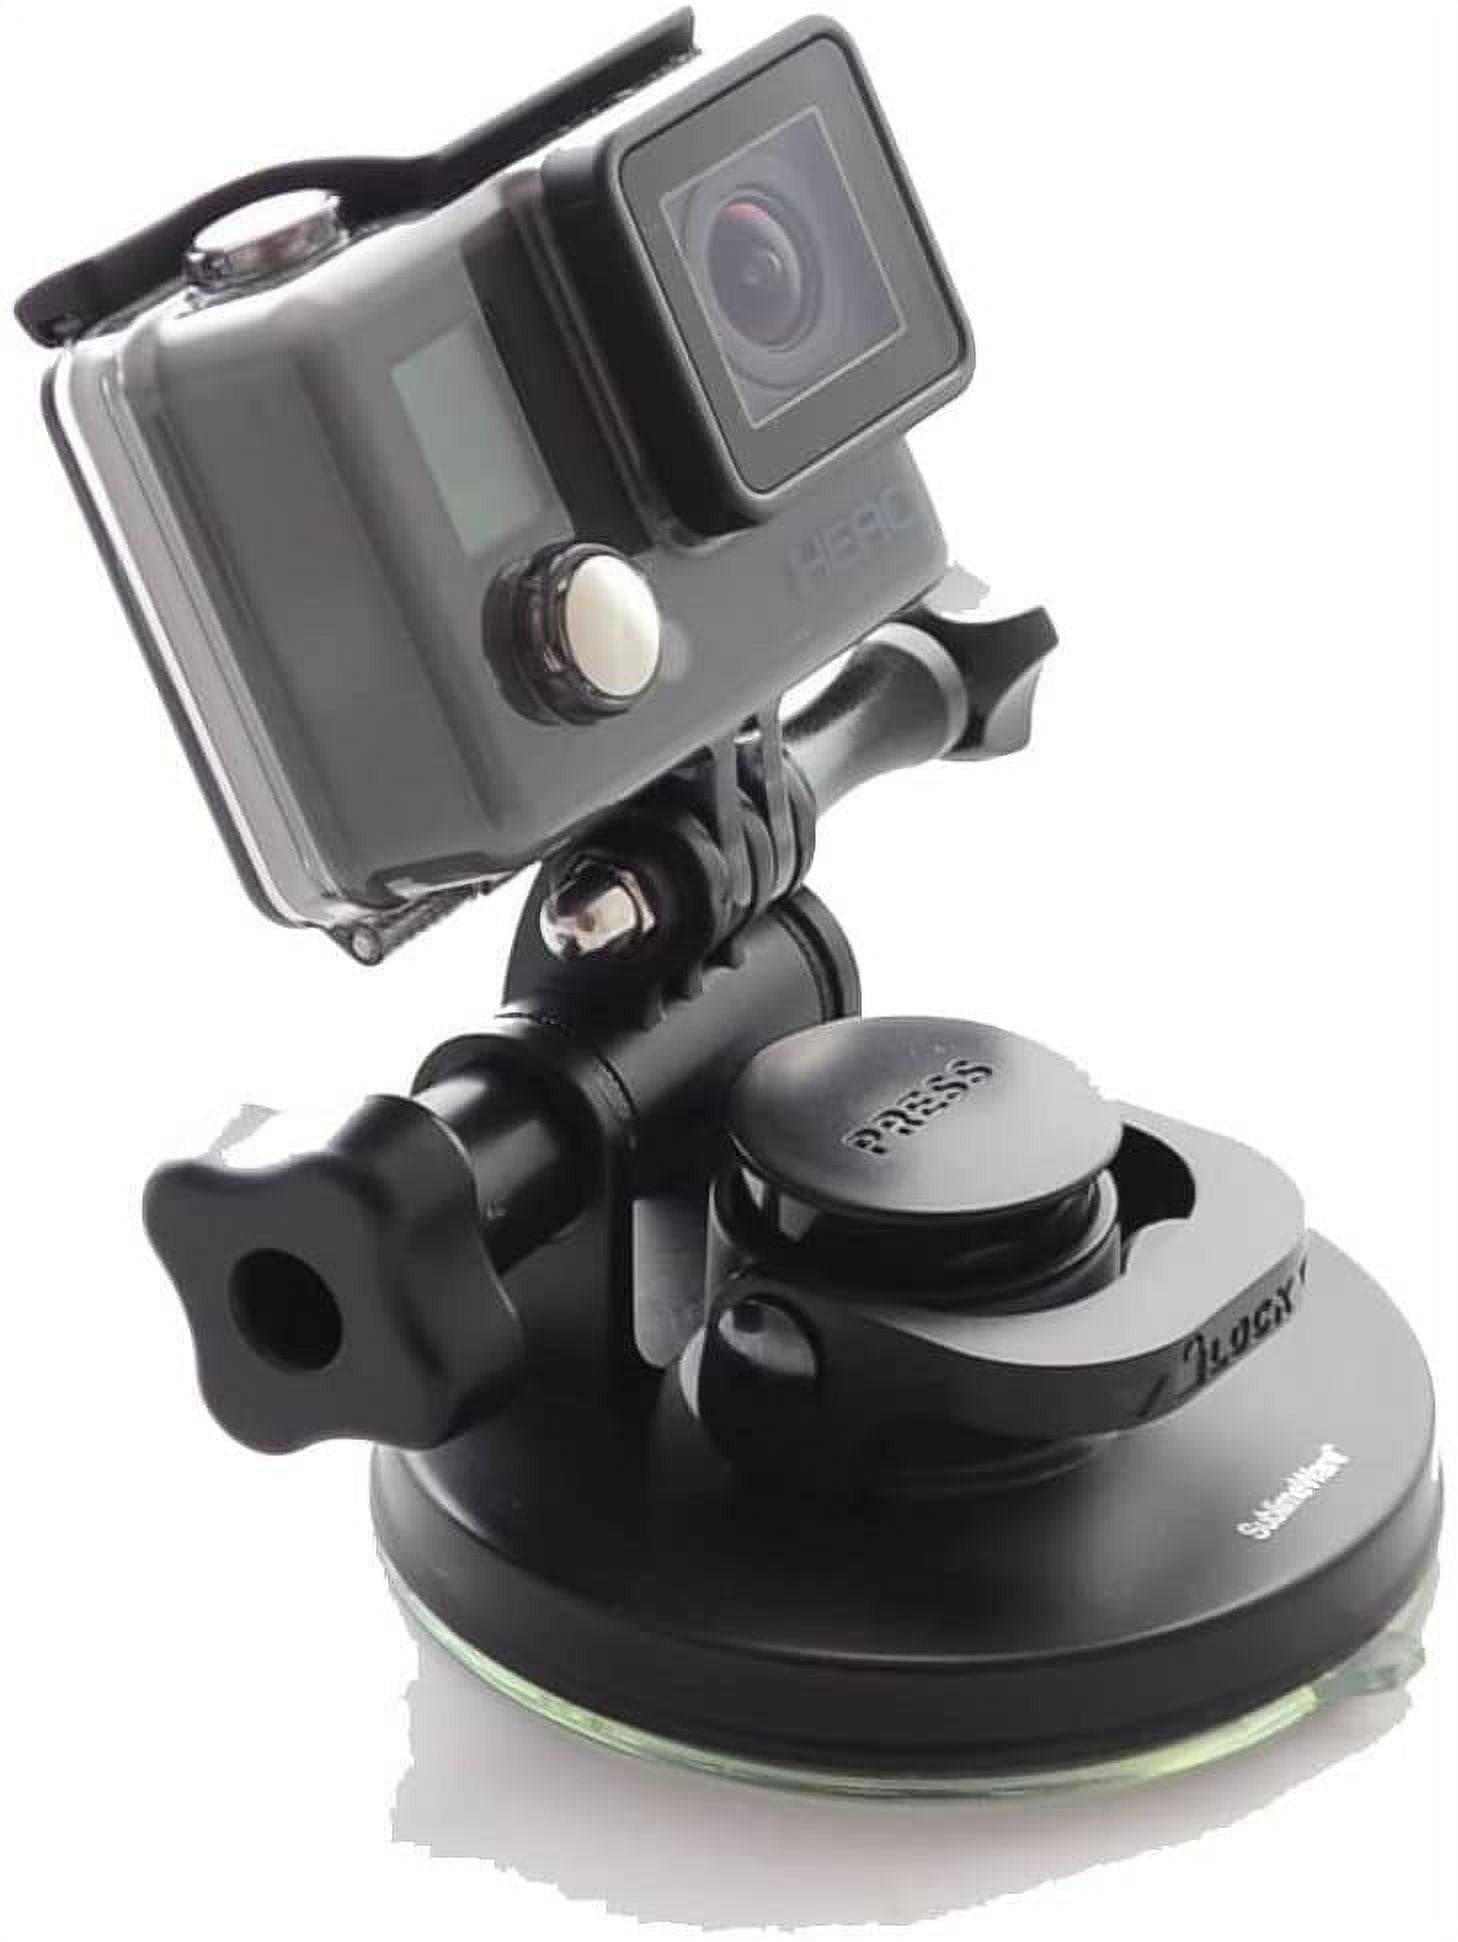 Suction Cup for Gopro Mount Car Windshield Window Vehicle Boat Camera Holder for Gopro Suction Cup Mount Windshield Mount - for GoPro Max 360 Hero 8 Black Hero 7 Hero6 Hero5 Hero4 HD by Su - image 4 of 8